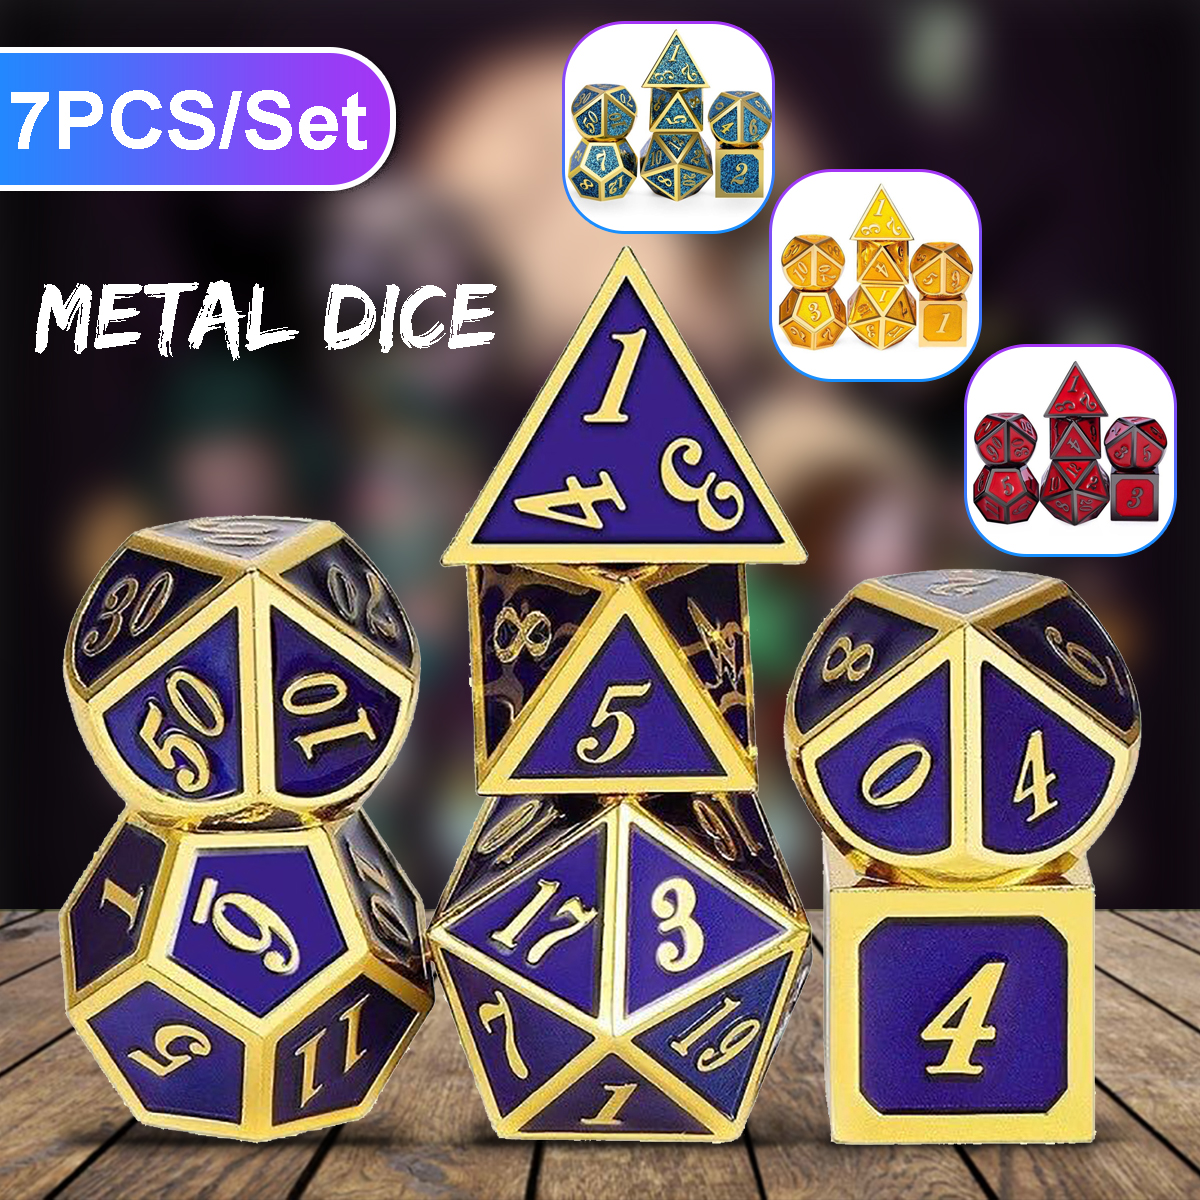 7-PcsSet-Metal-Dice-Set-Role-Playing-Dragons-Table-Board-Game-Toys-With-Cloth-Bag-Bar-Party-Game-Dic-1672532-1